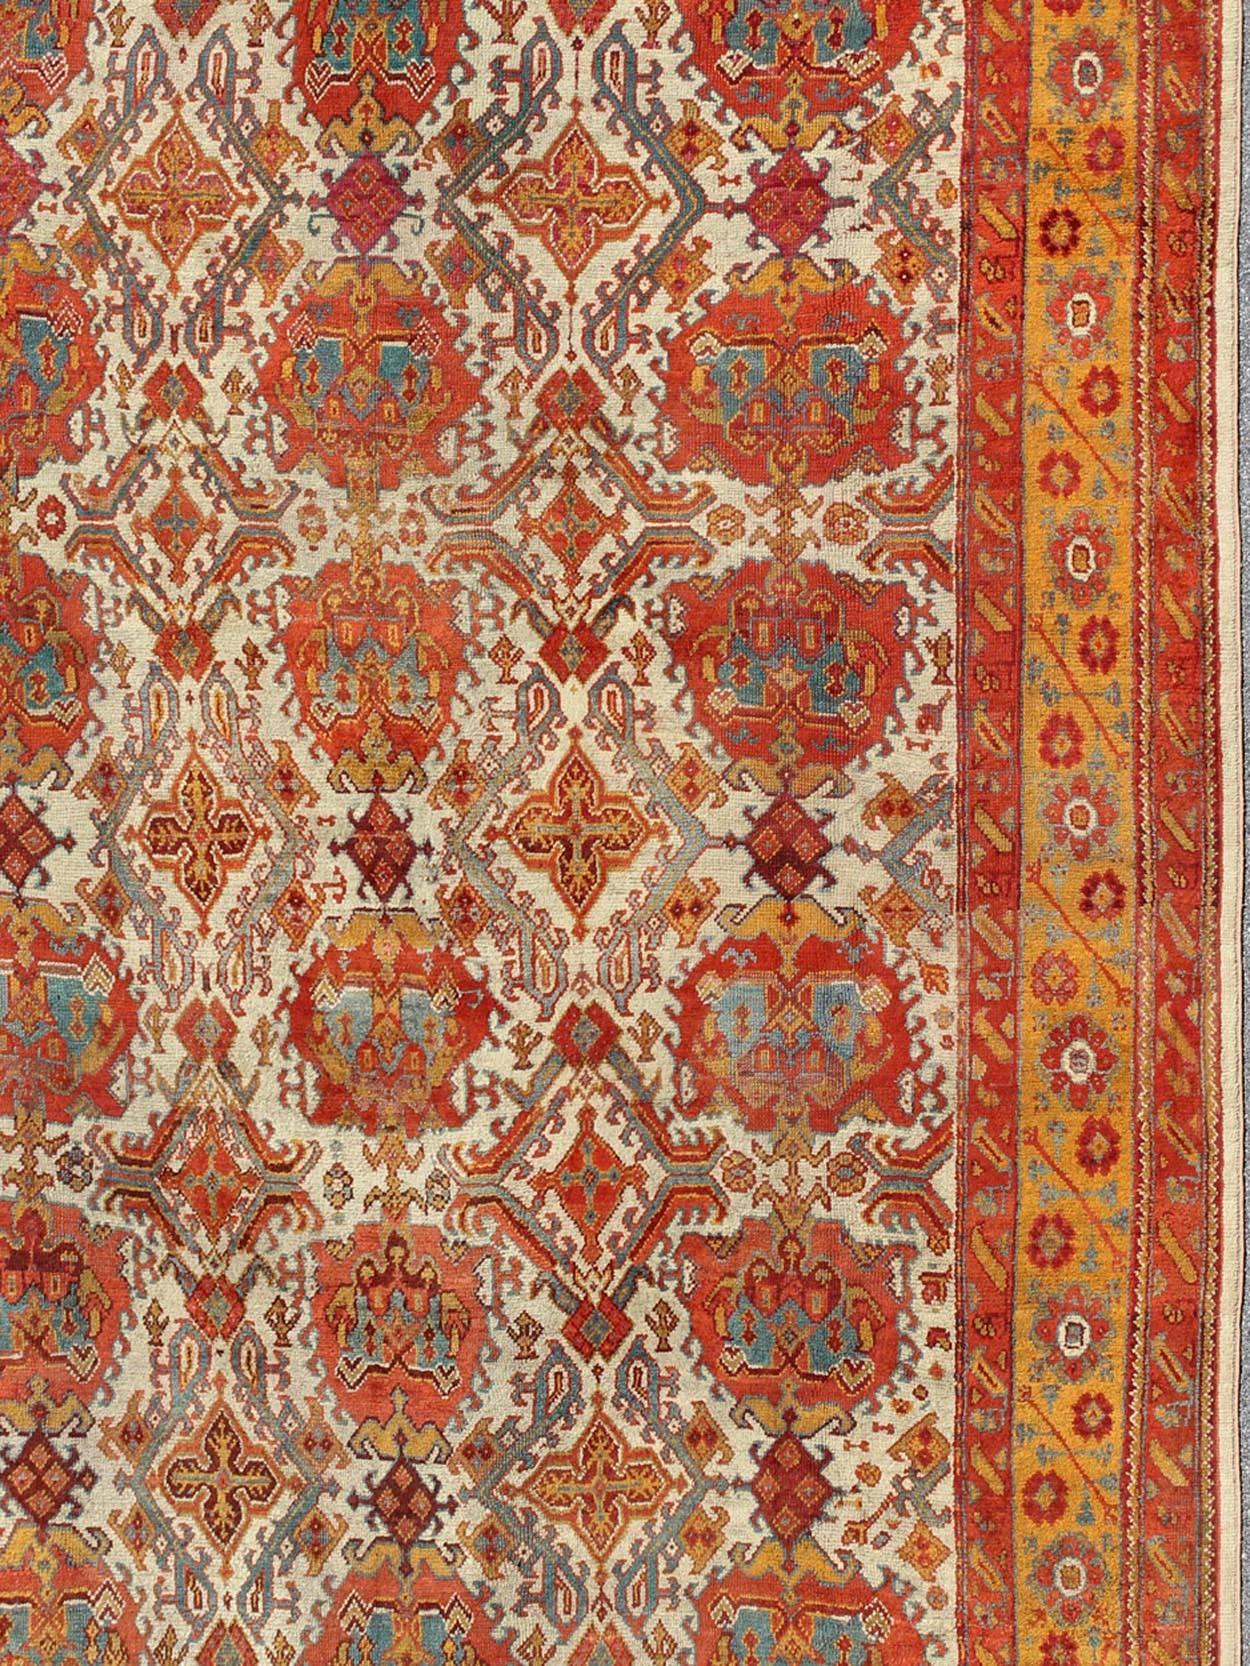 Antique Turkish Oushak Rug with Multi-Medallions in Ivory, Orange, Red & Blue In Good Condition For Sale In Atlanta, GA